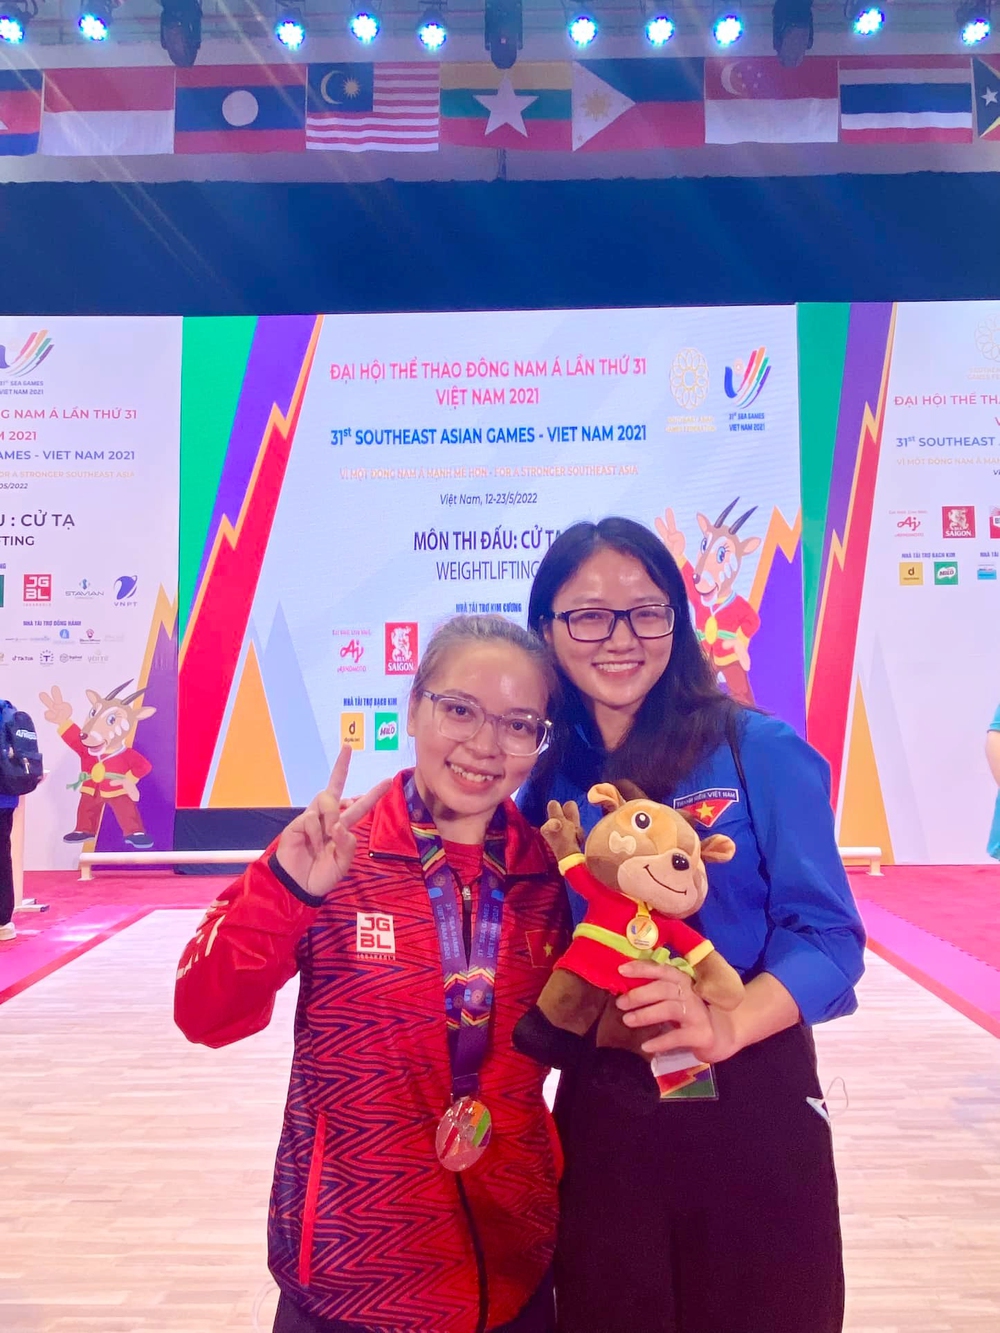 The female journalism student for 3 years cherished to be a SEA Games volunteer, received a winning email like a lottery ticket - Photo 1.